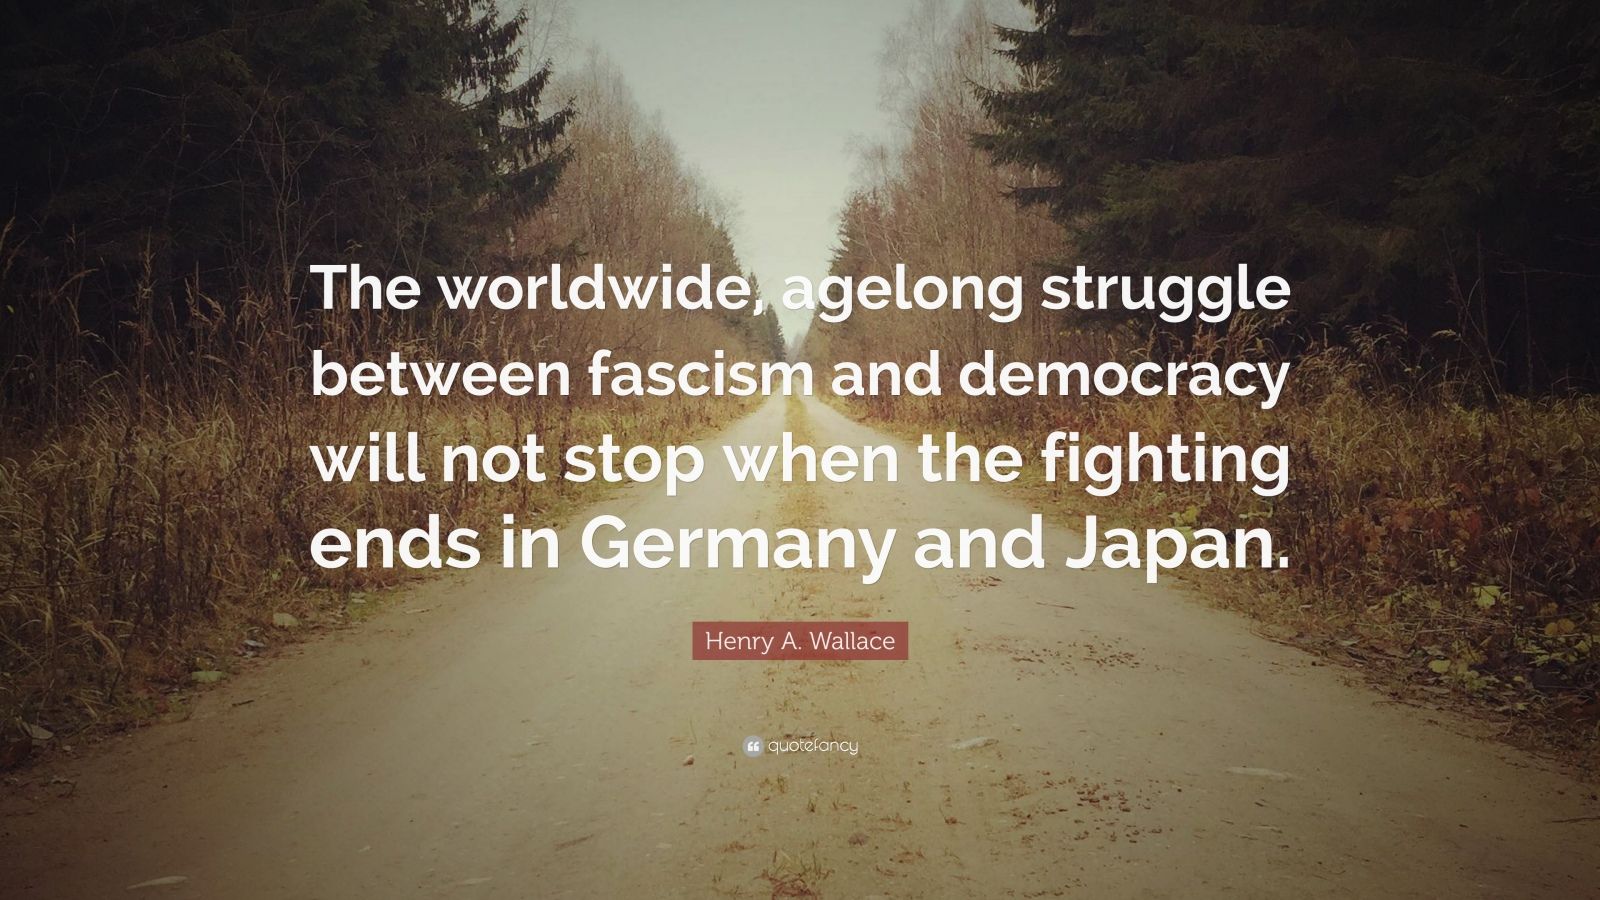 Henry A. Wallace Quote: “The worldwide, agelong struggle between